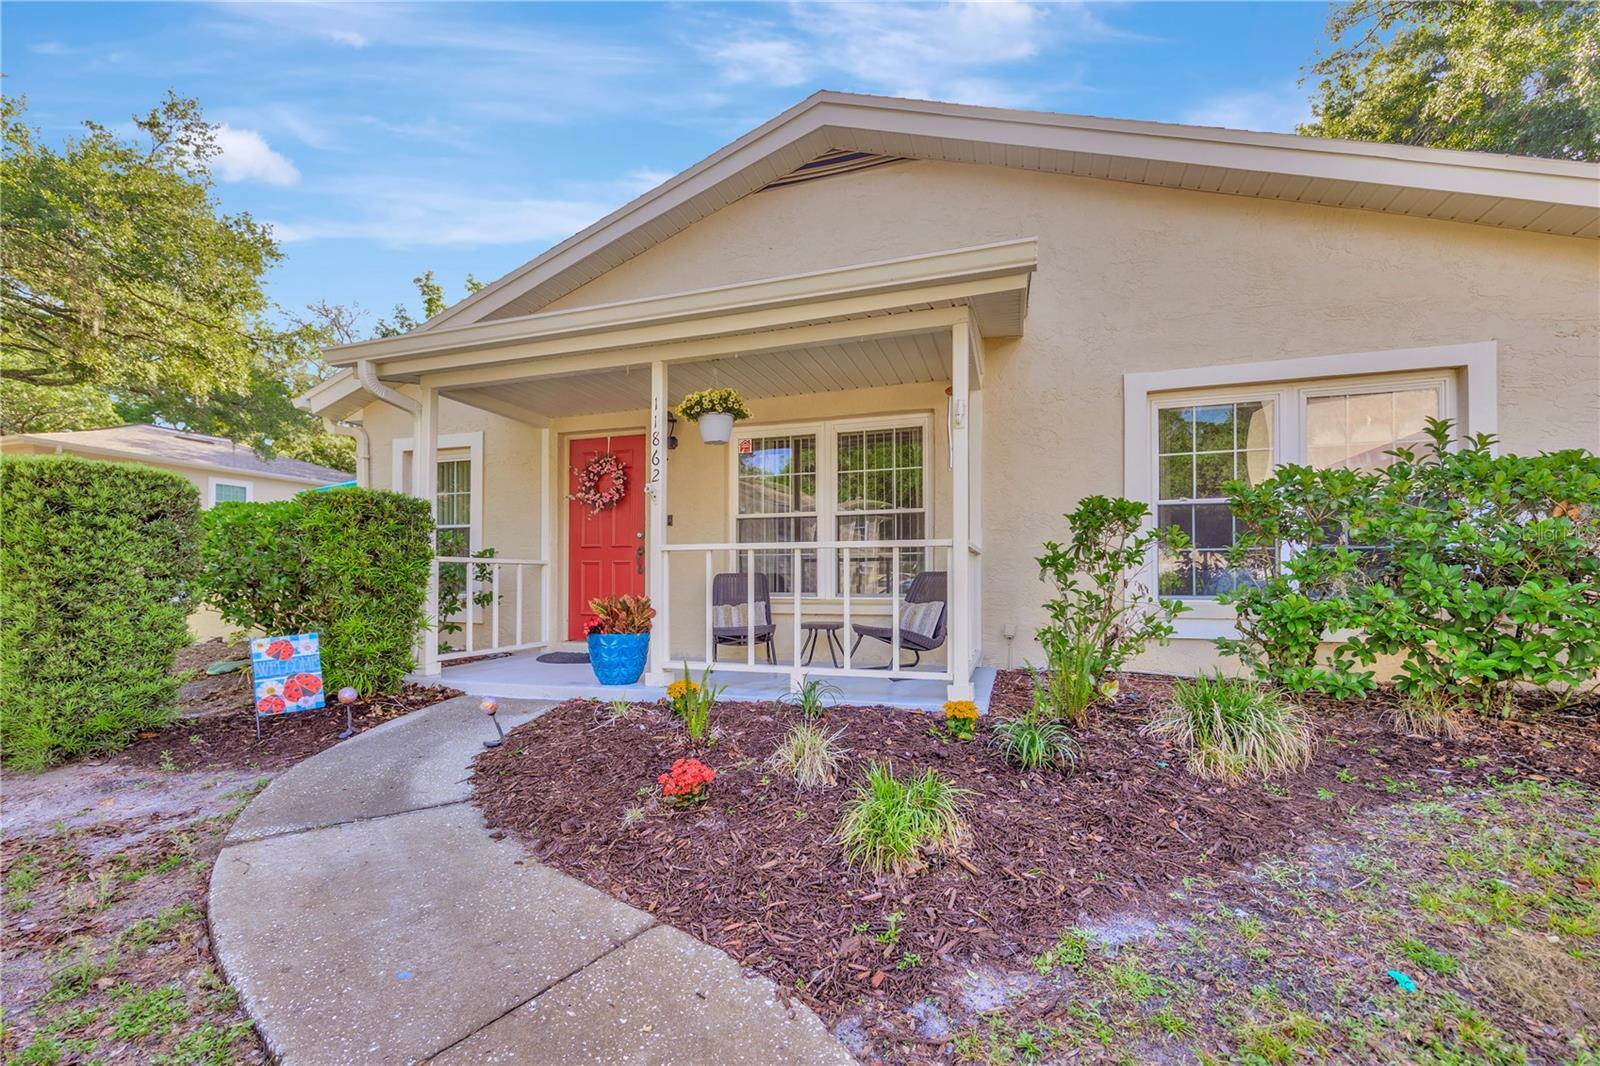 Photo one of 11862 Northtrail Ave Tampa FL 33617 | MLS T3513412